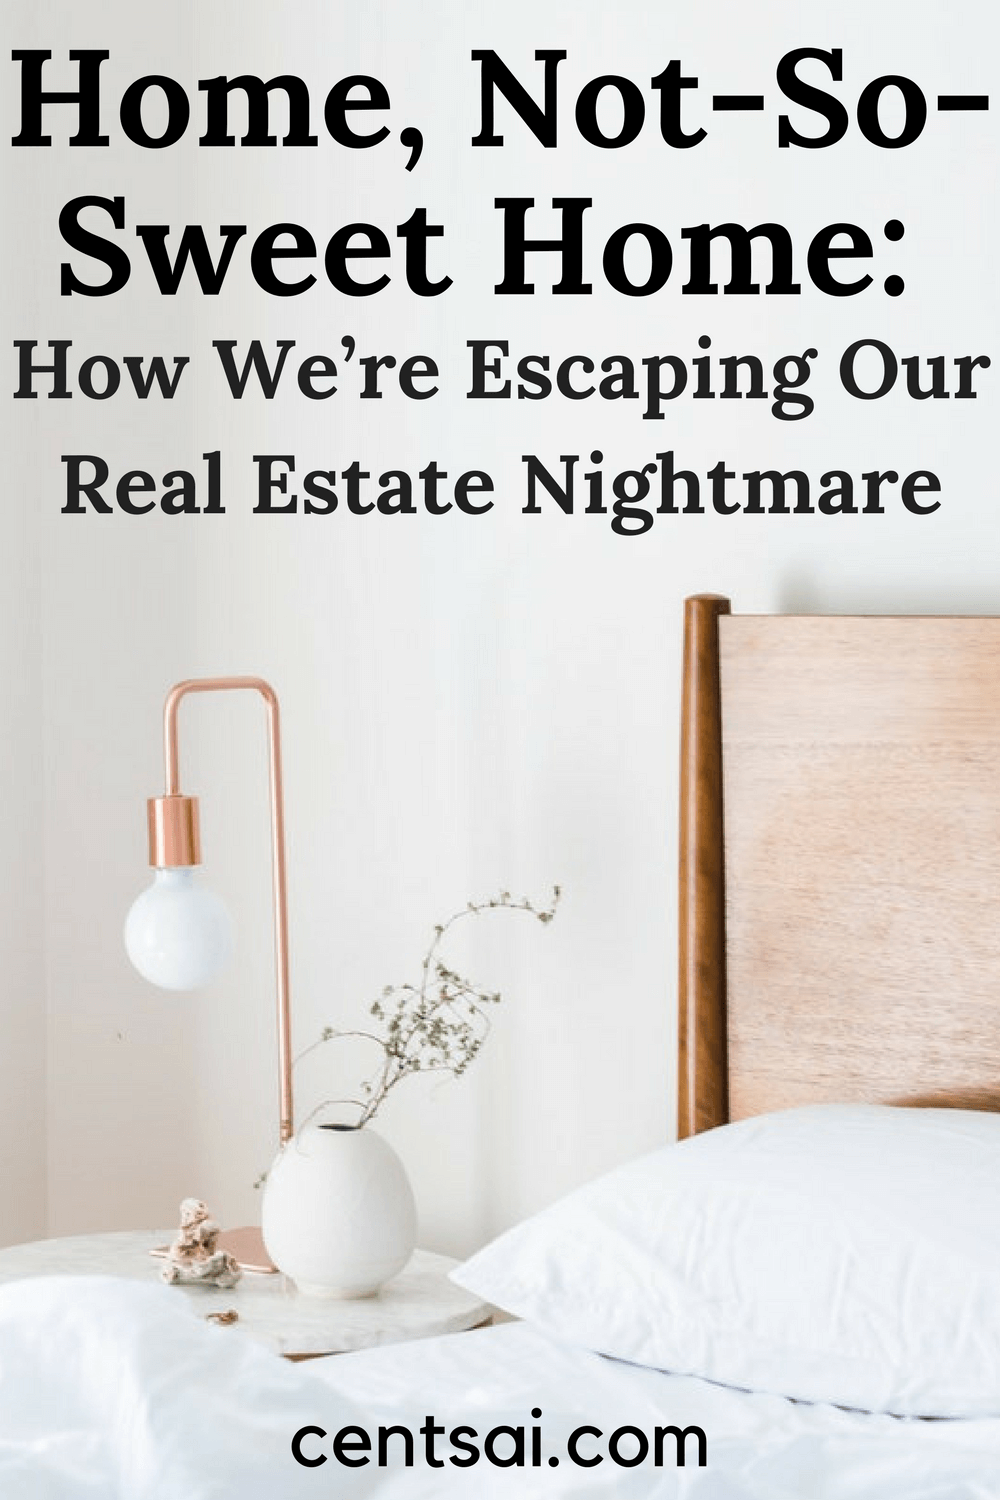 Home, Not-So-Sweet Home How We’re Escaping Our Real Estate Nightmare